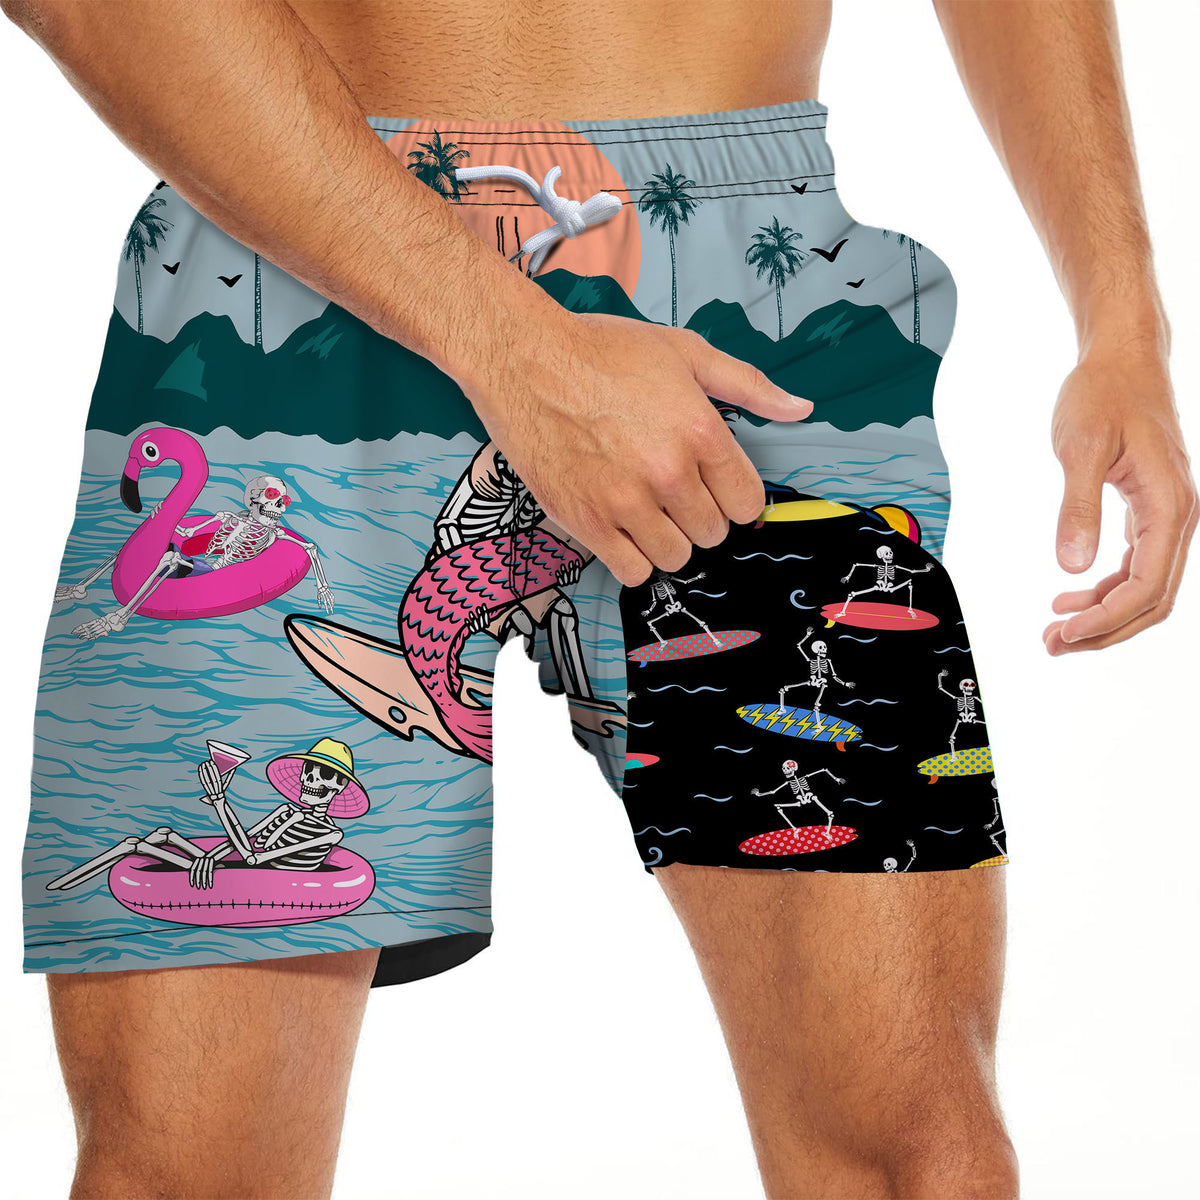 Men's Swim Trunks With Compression Liner 5.5" Inseam Quick Dry Swim Shorts With Pockets - Skeleton Surf